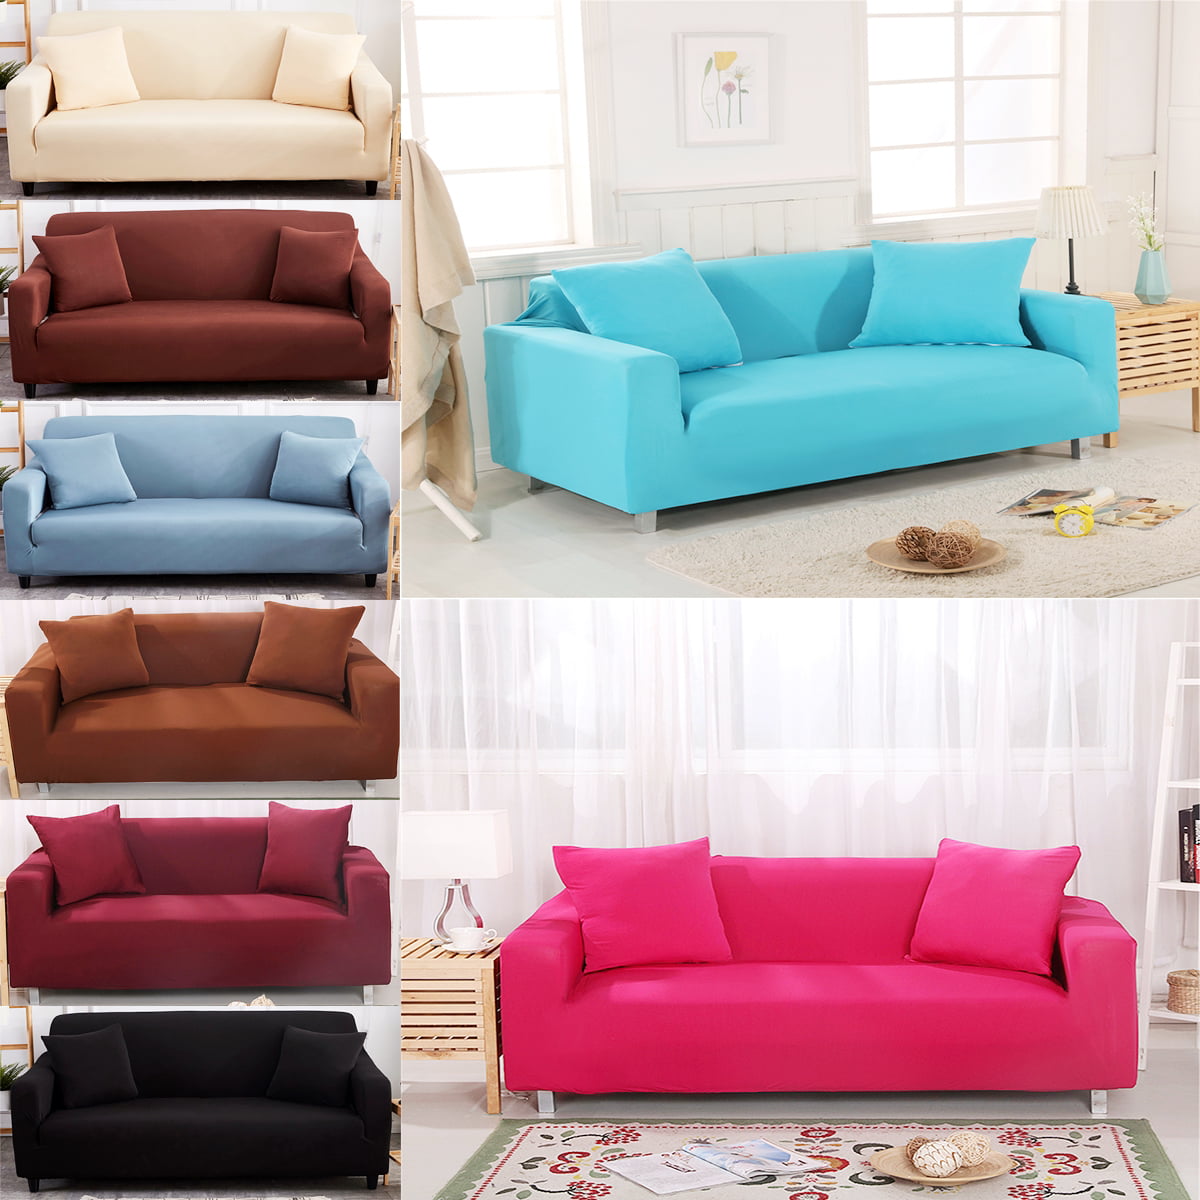 Details about   Replacement Stretch Chair Sofa Seat Cushion Cover Couch Slipcover Protect 1-4 